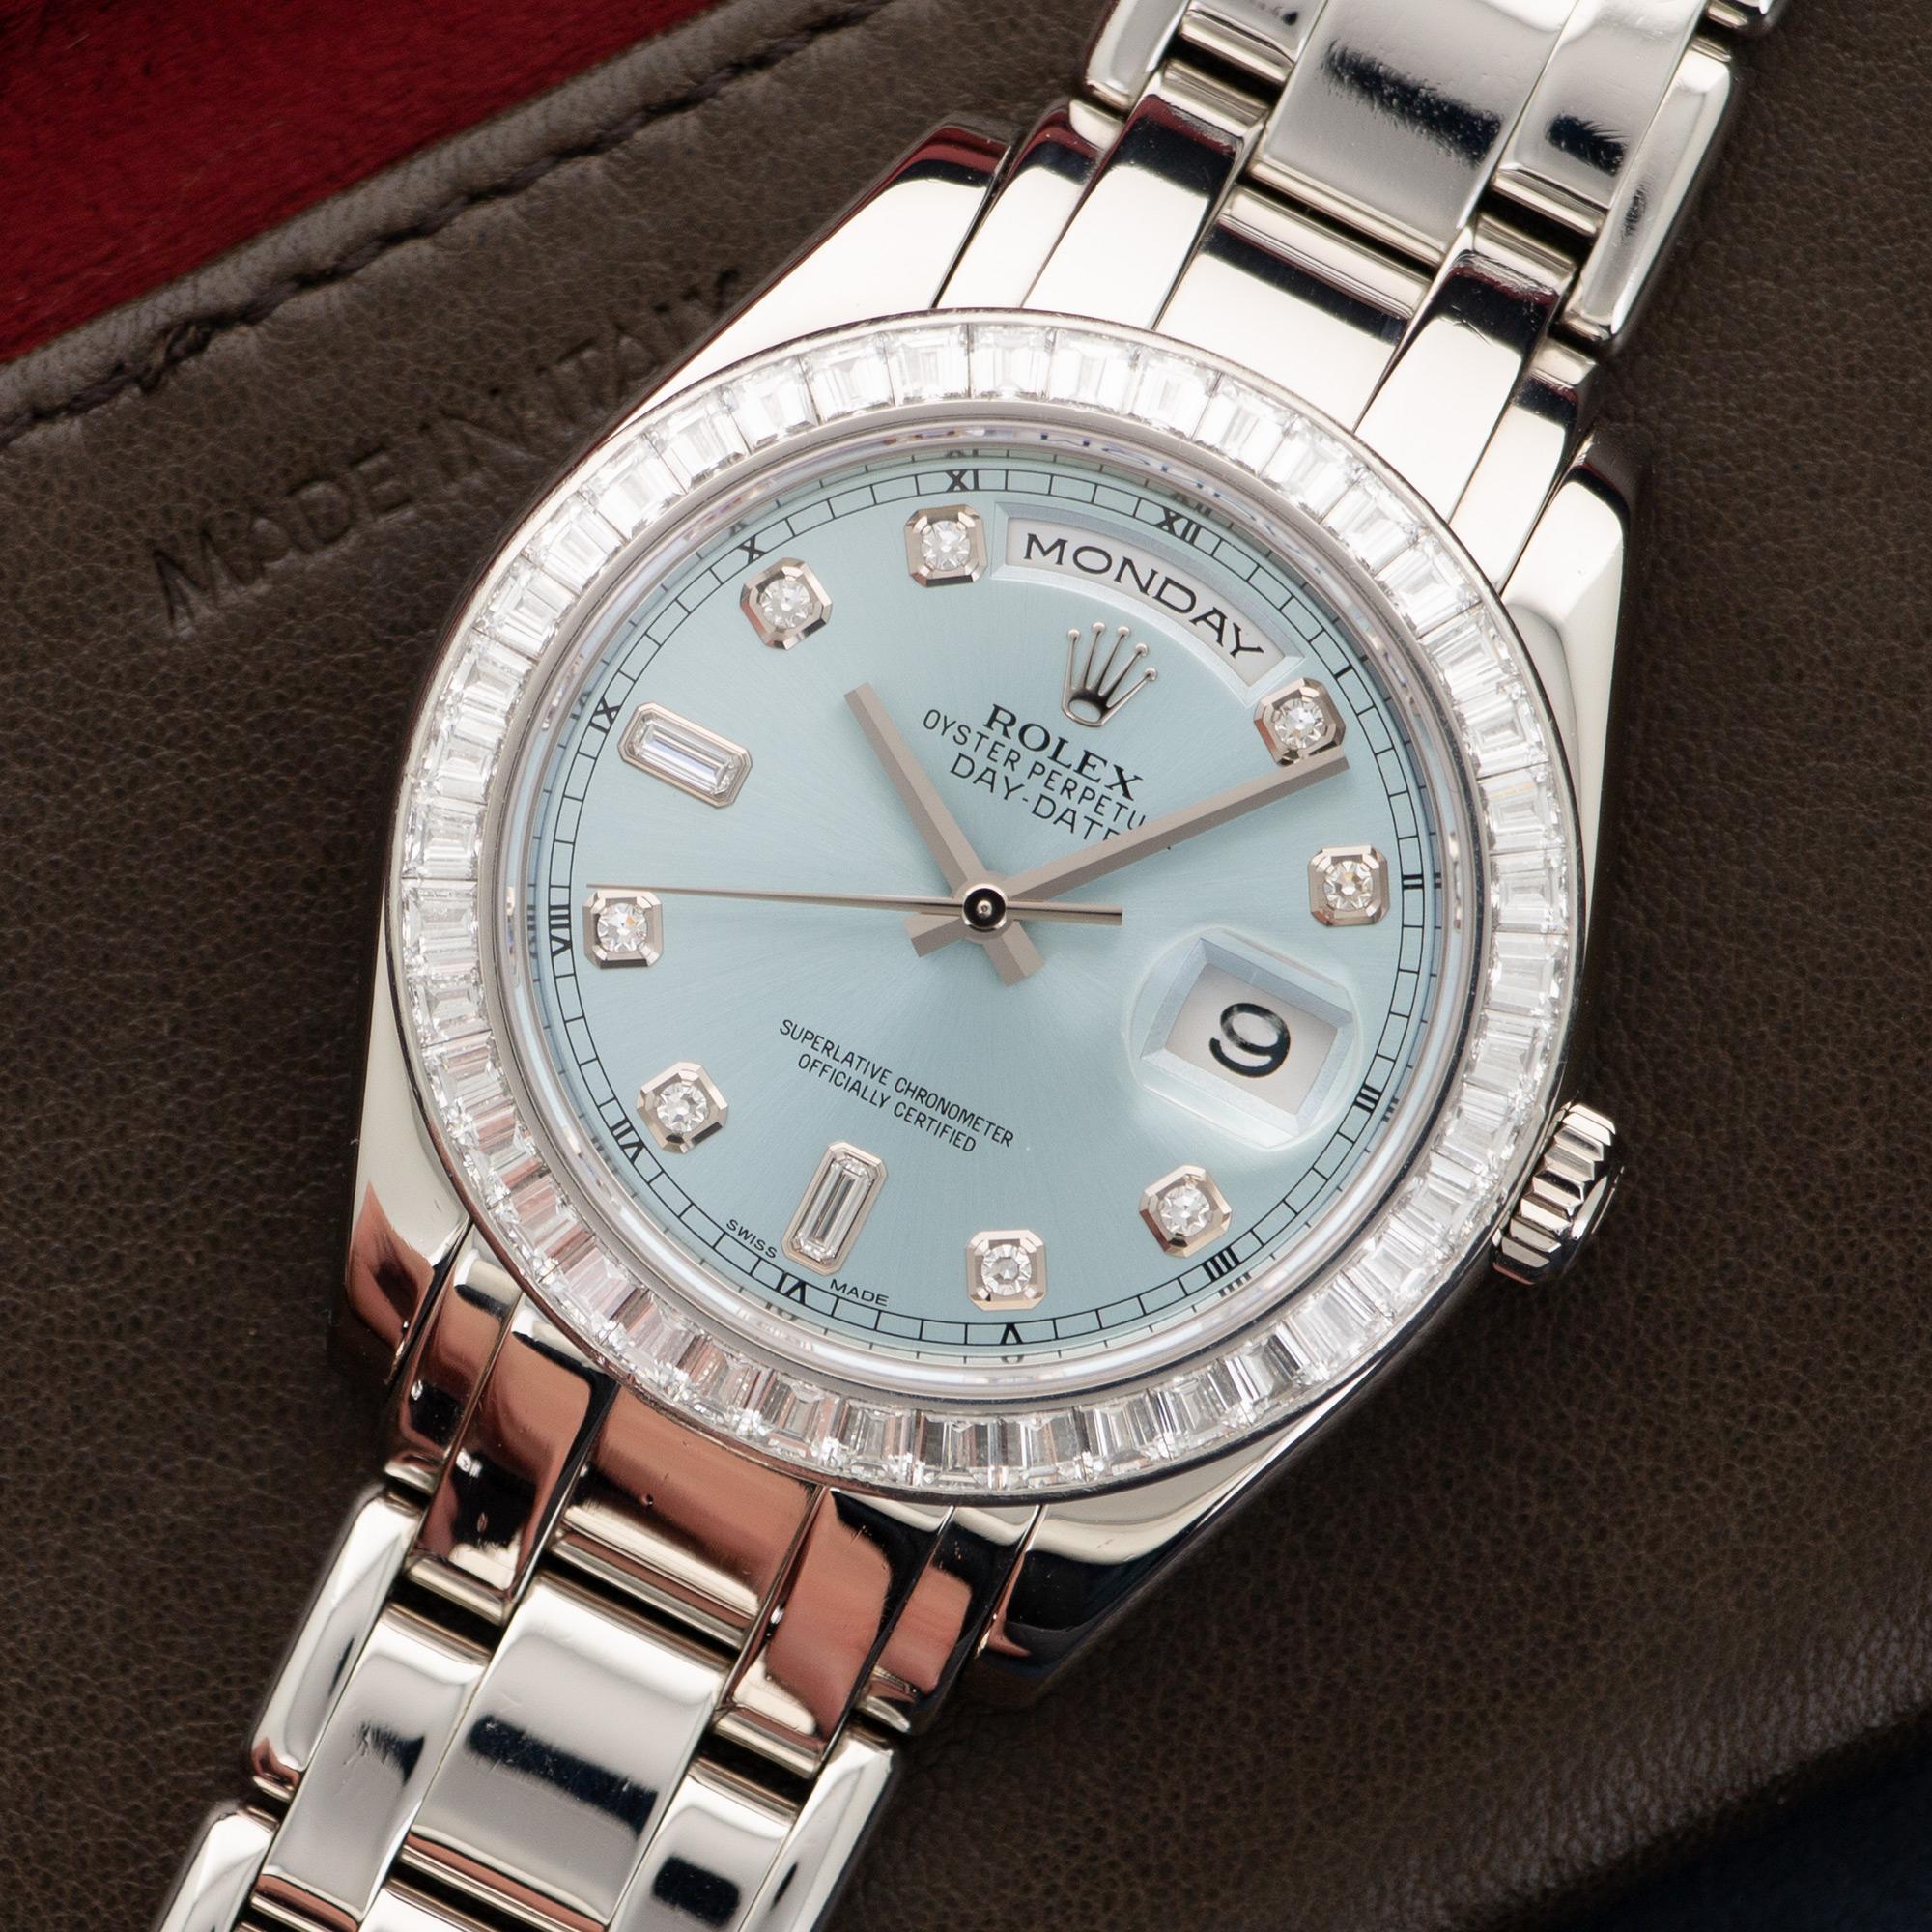 An Original Platinum Day-Date Masterpiece Watch with Original Square-Cut Diamond Bezel, by Rolex. Model Number 18956. Serial Number Dates the Watch to the Mid 2000's. 39mm Case Diameter. Glacier Blue Dial with Diamond Indexes. Comes in its Original